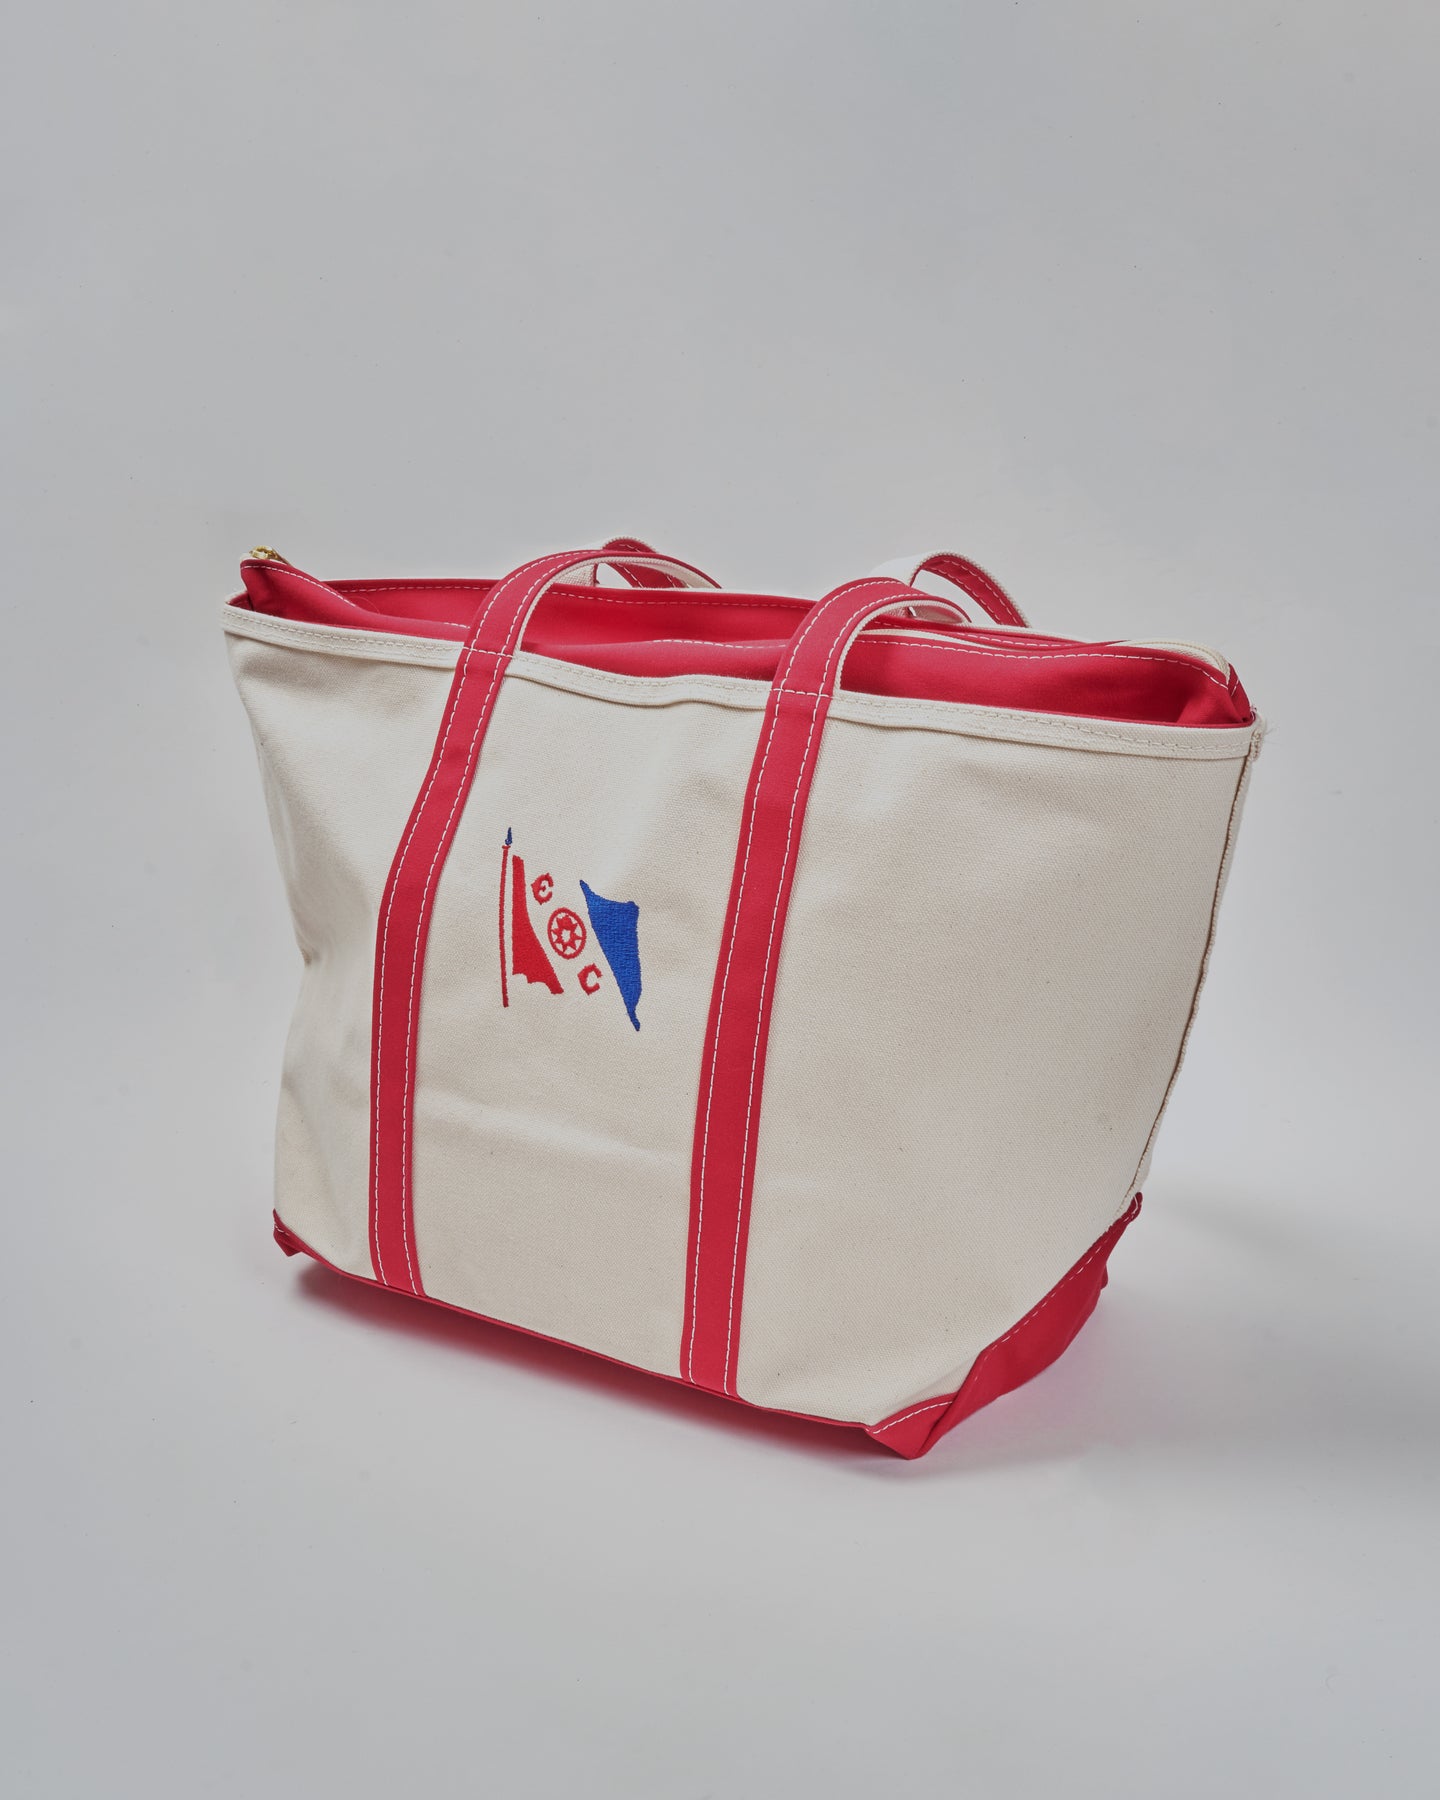 Sturdy Coral Canvas Boat and Tote Bag